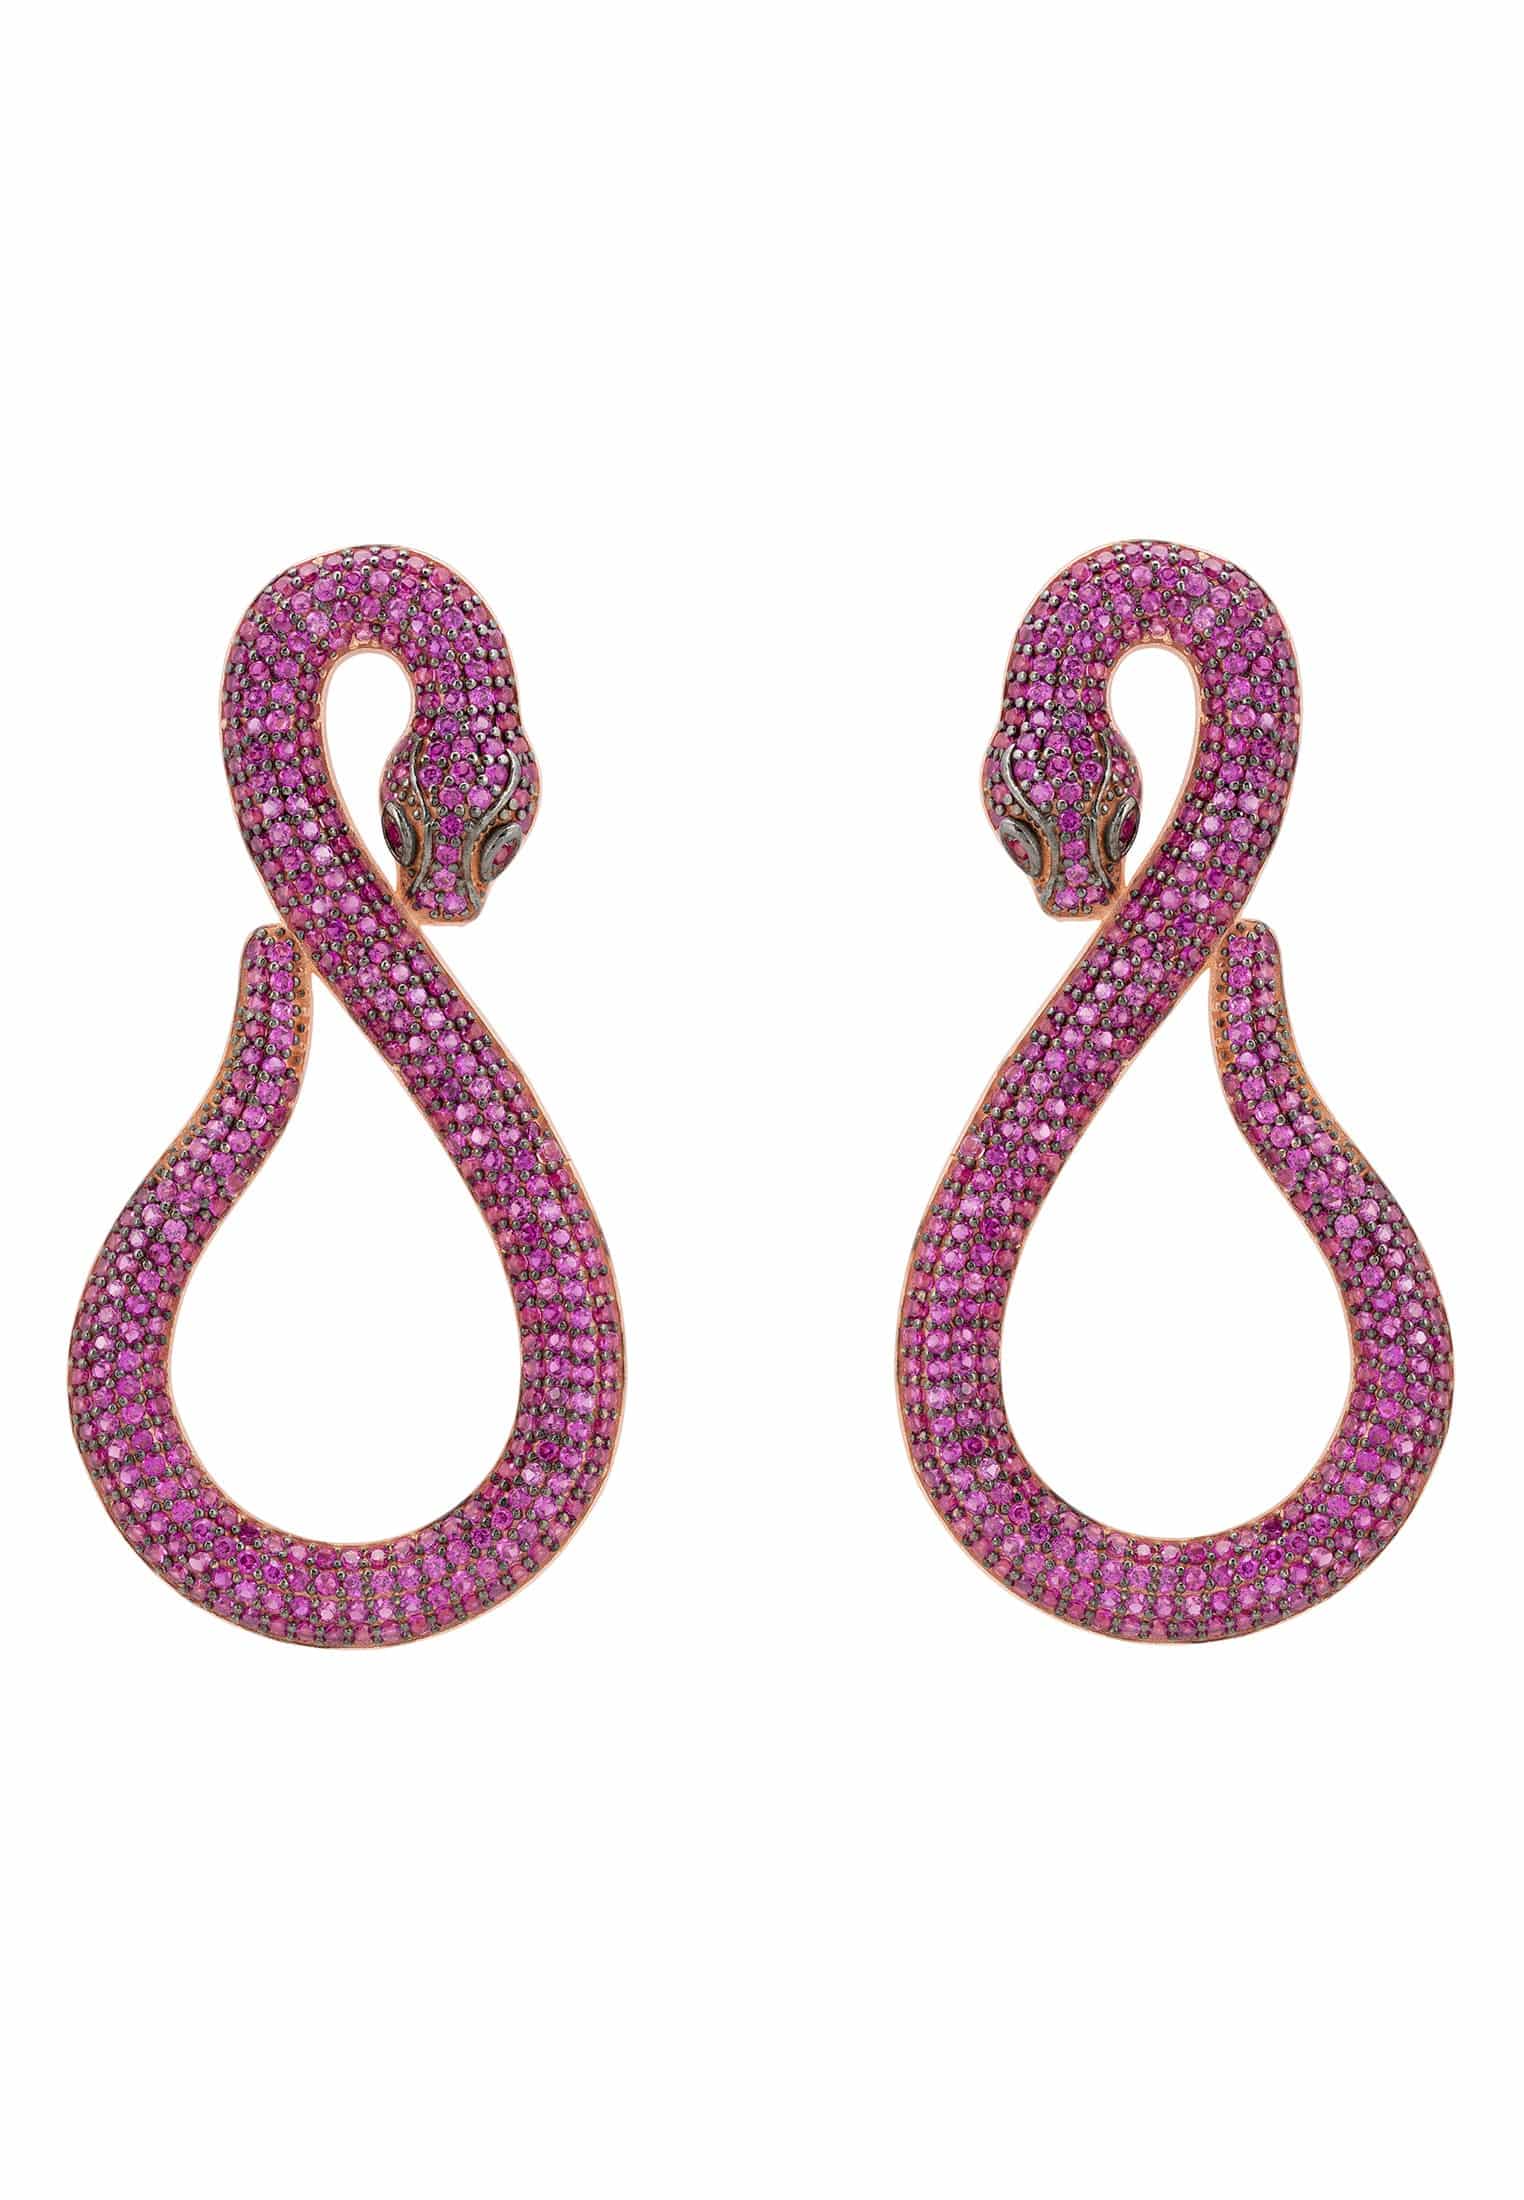 Rosegold Ruby Asp Snake Drop Earrings: Animal-Inspired Chic Jewelry - Jewelry & Watches - Bijou Her -  -  - 